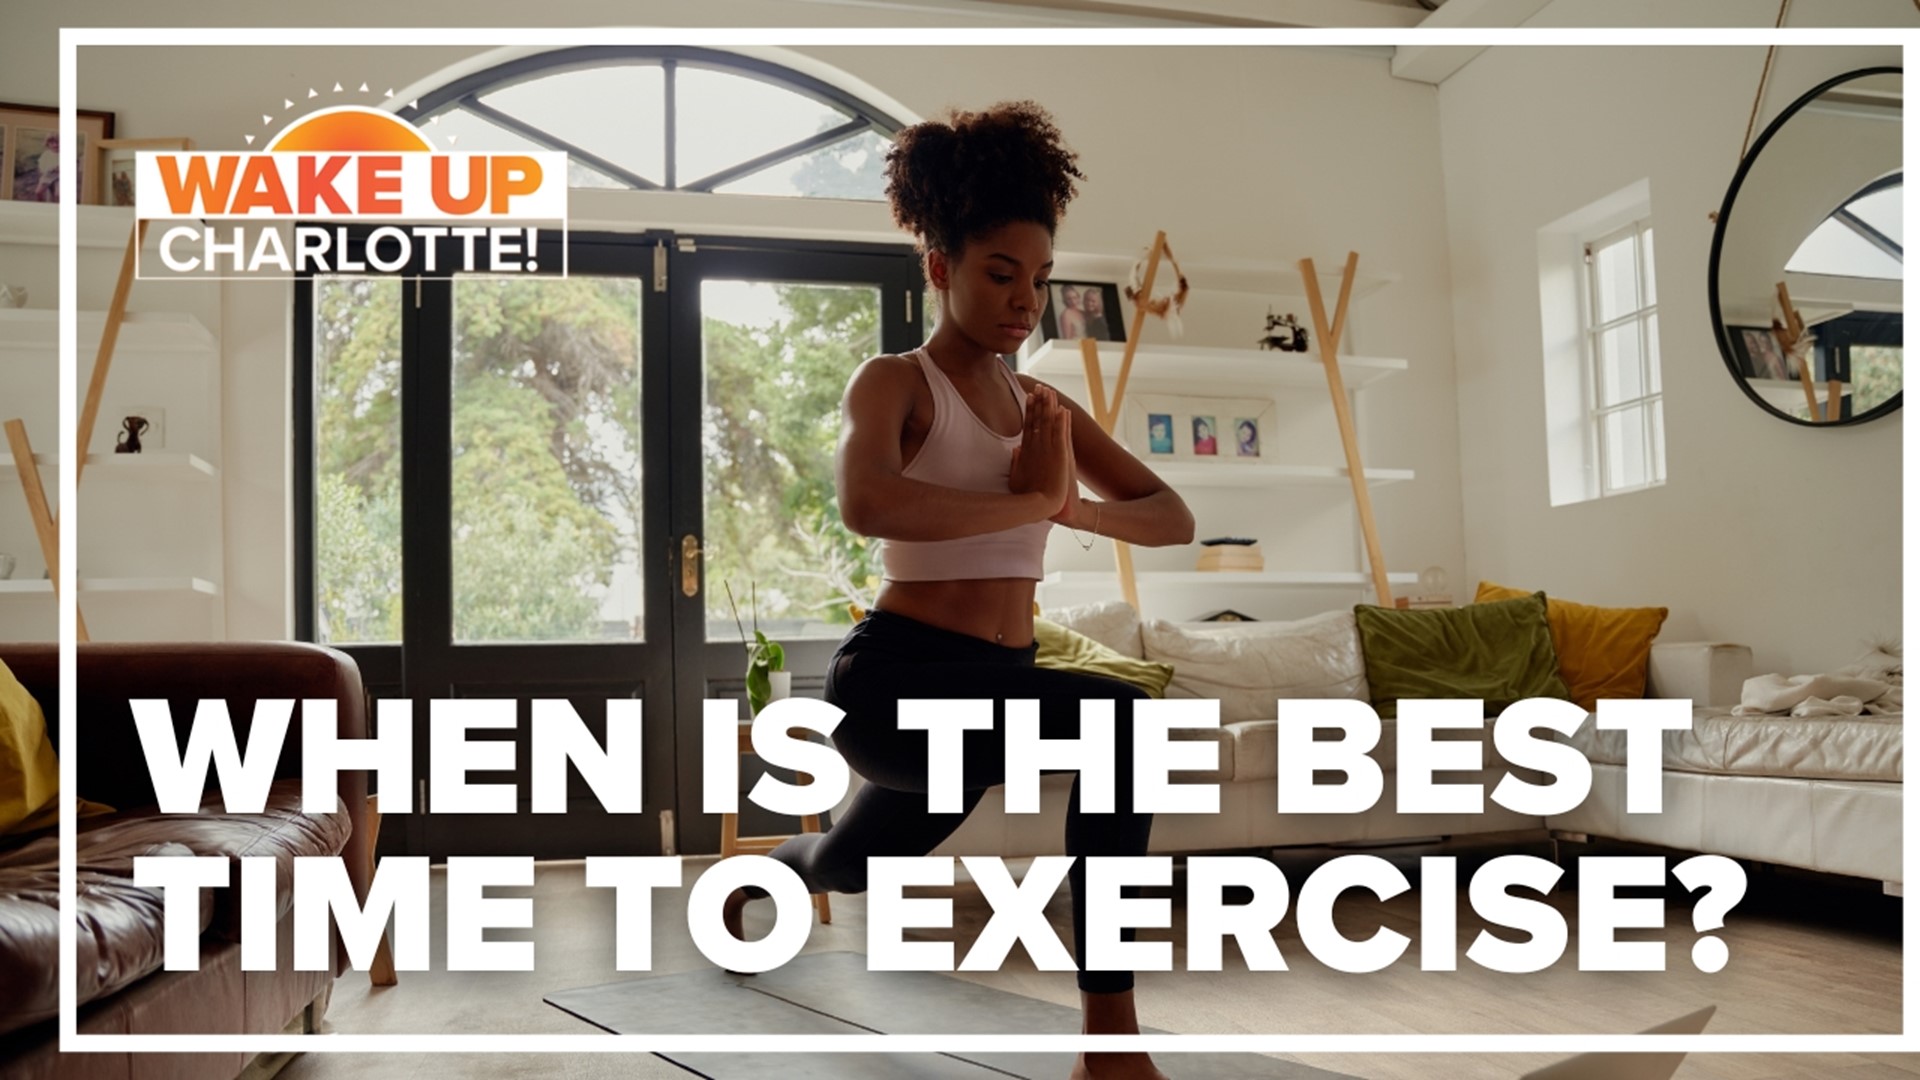 Could the type of person you are determine the best time to exercise?